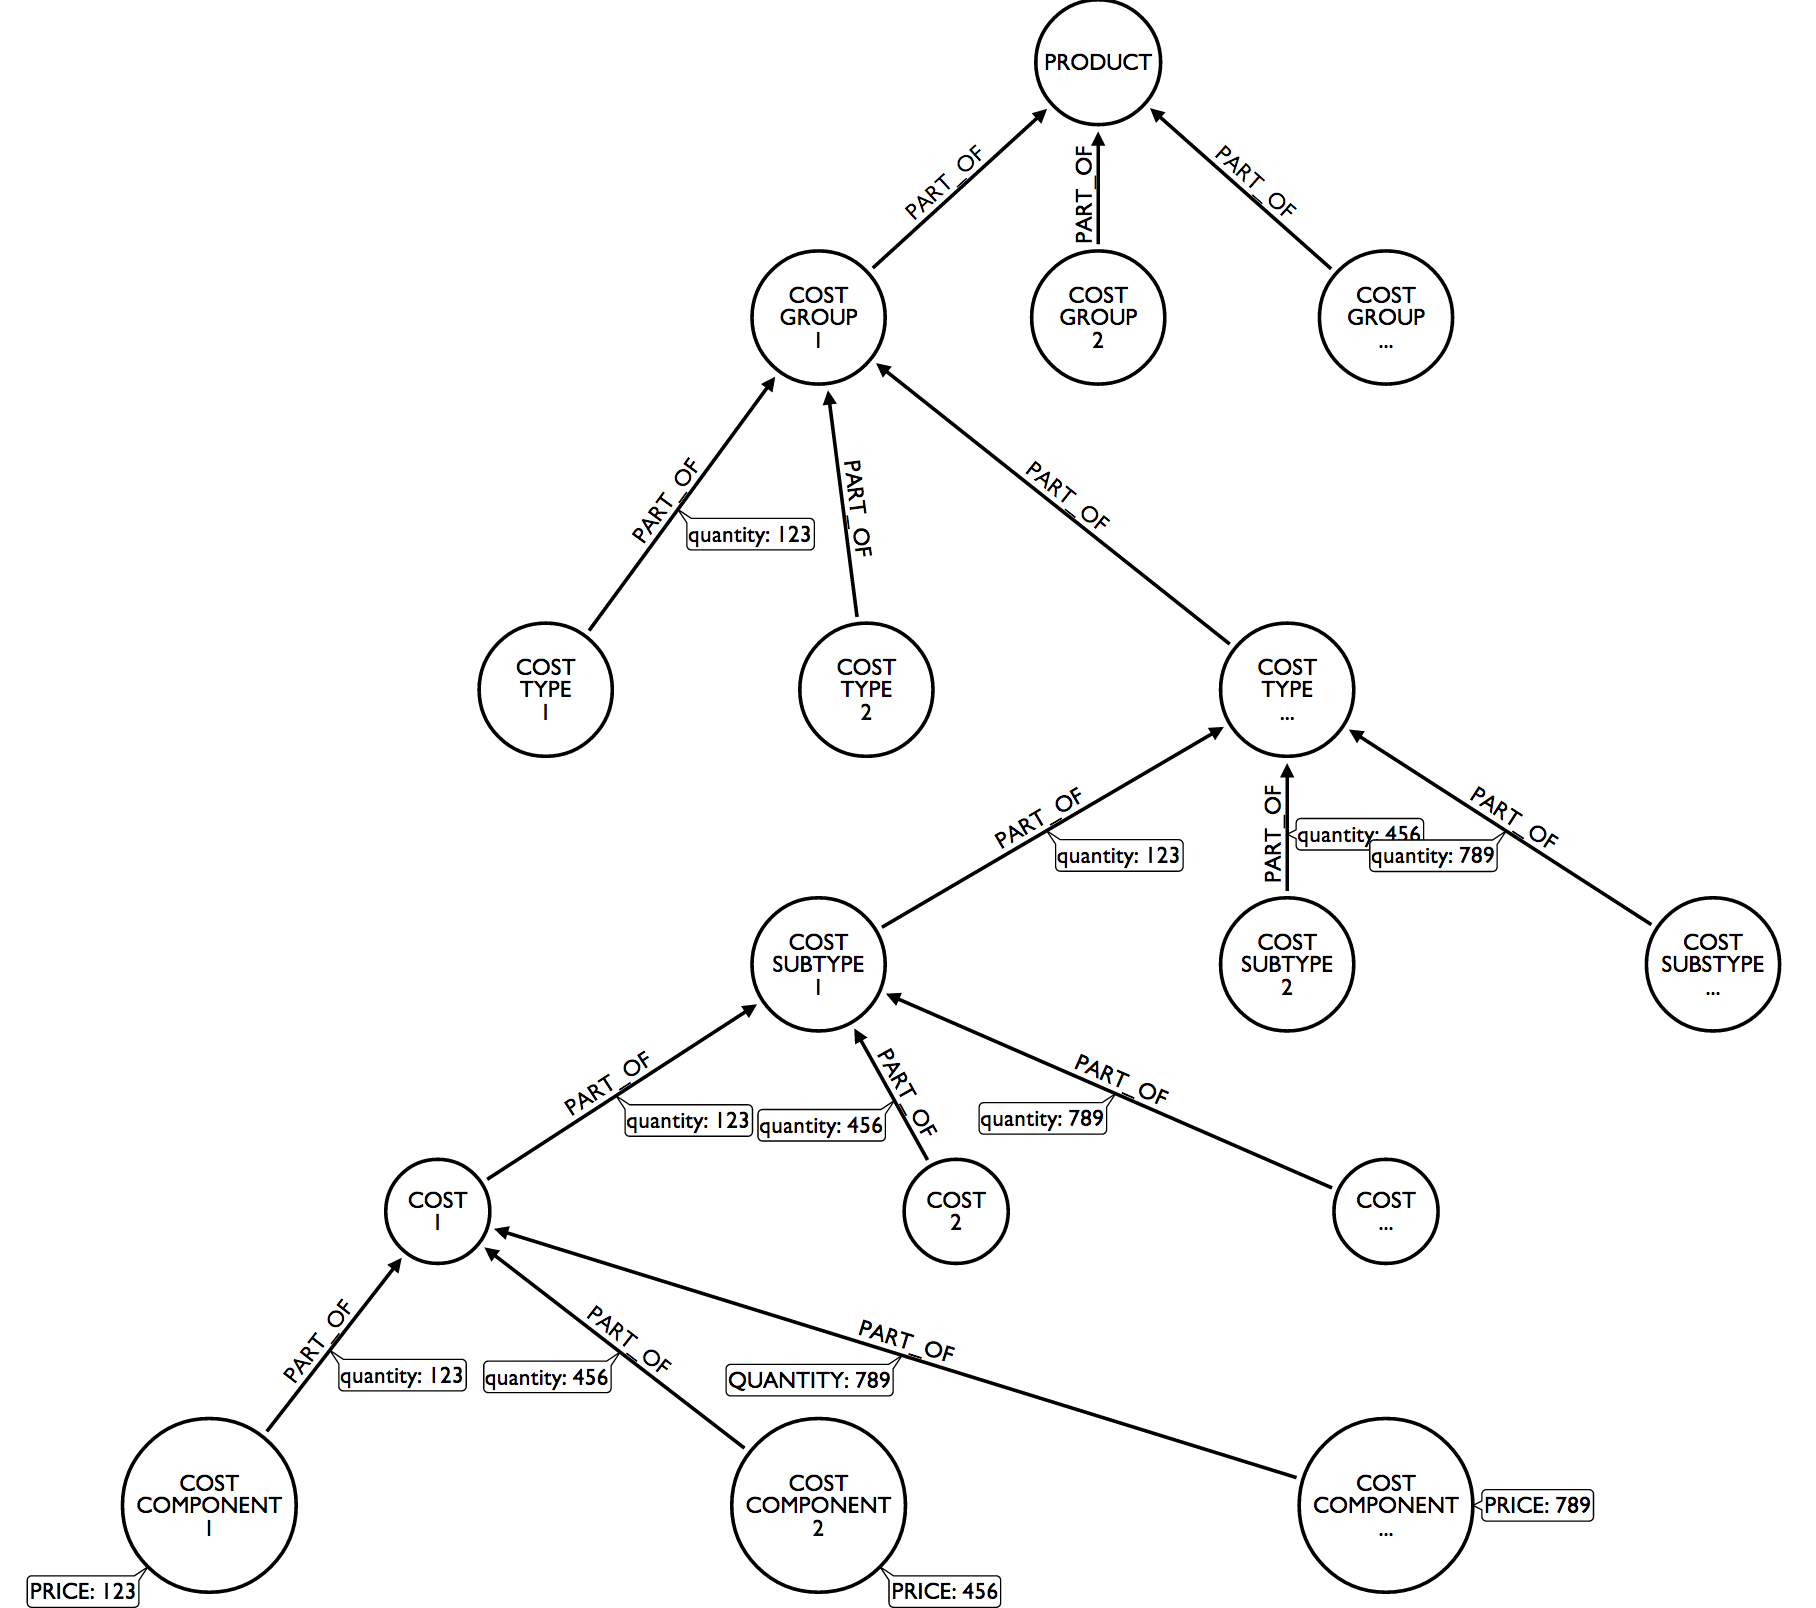 neo4j-create-relationship-between-two-existing-nodes